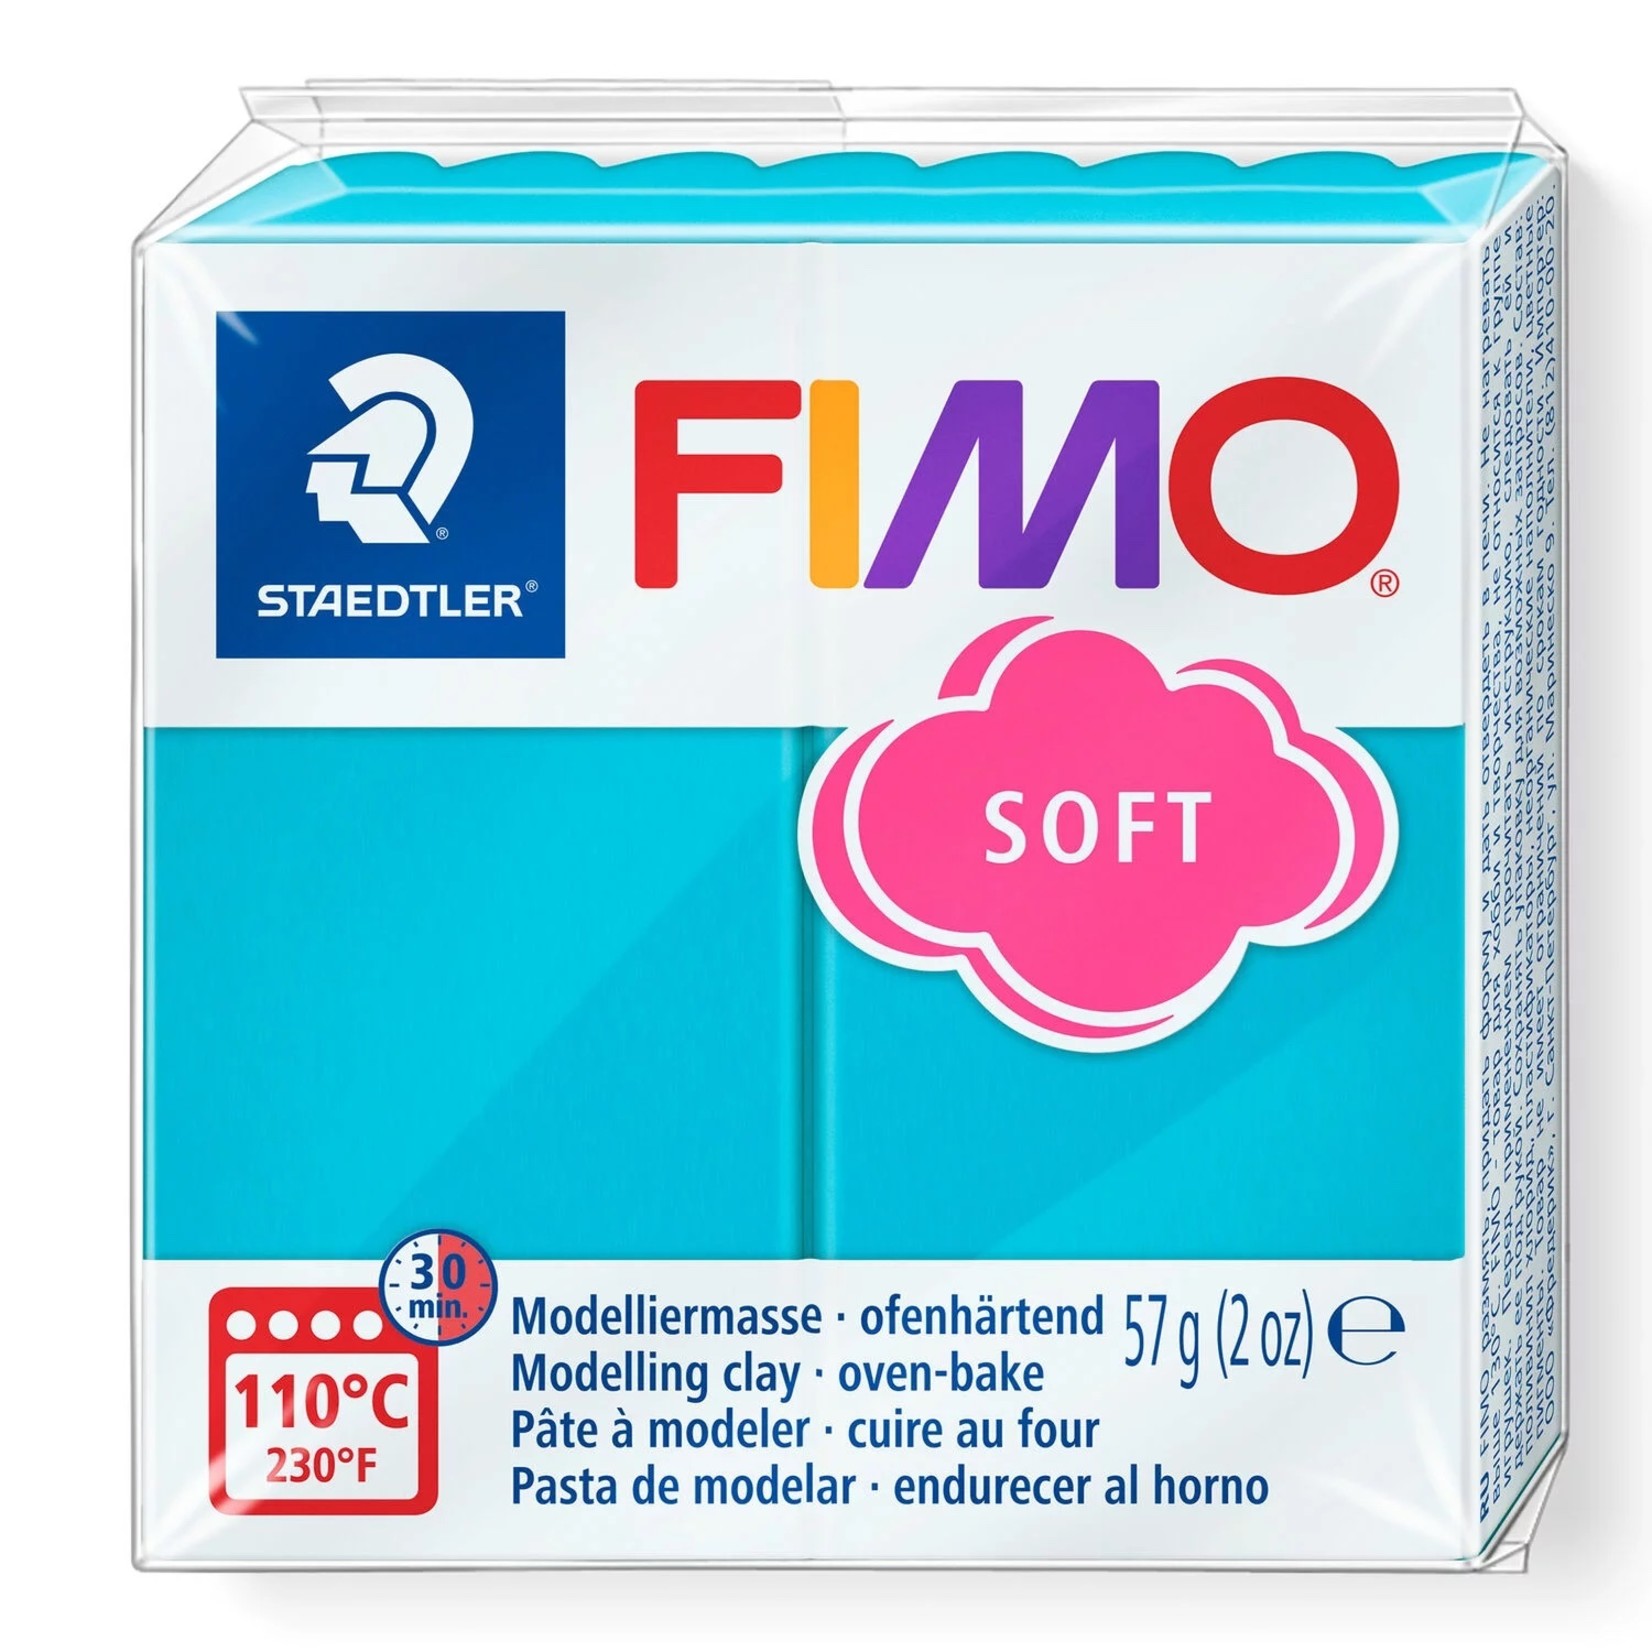 STAEDTLER FIMO SOFT 39 PEPPERMINT